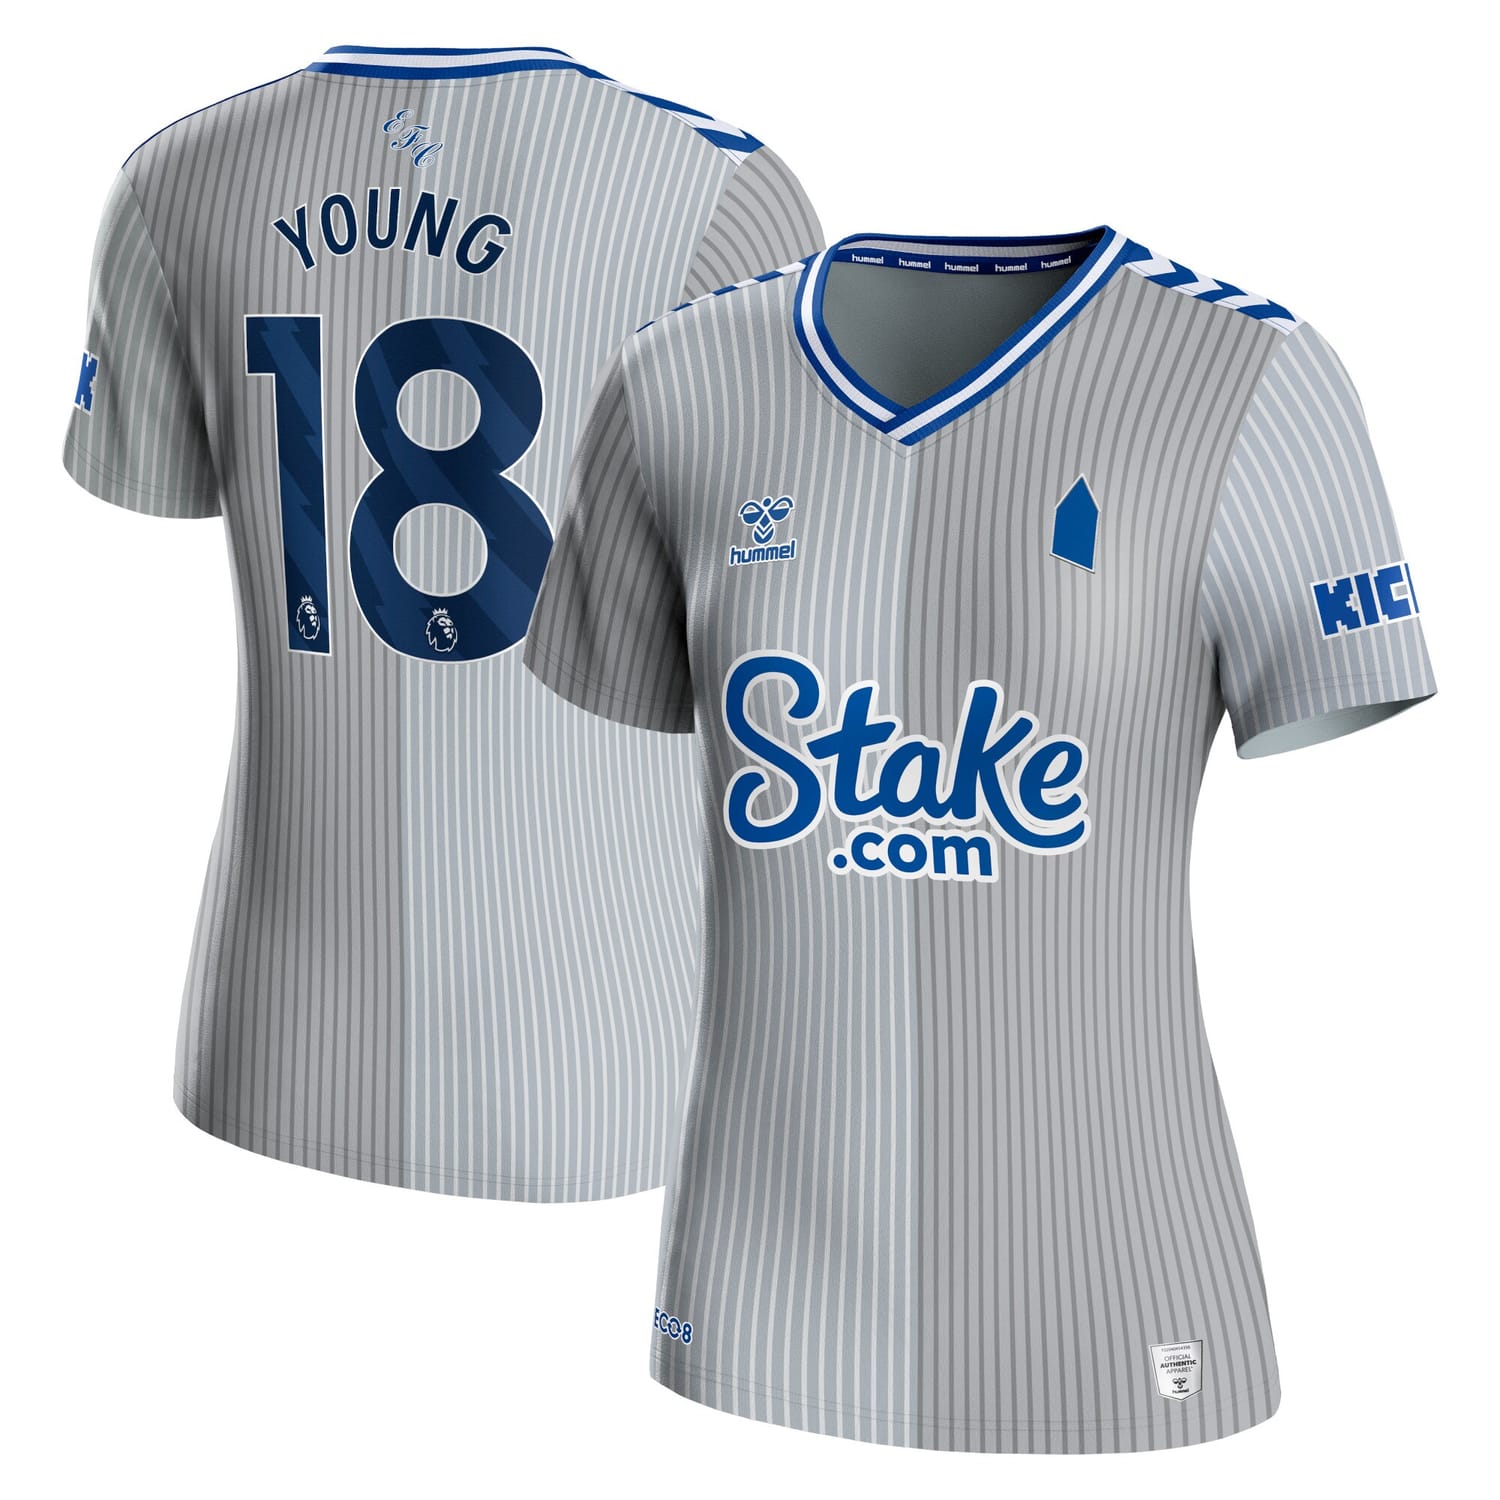 Premier League Everton Third Jersey Shirt 2023-24 player Ashley Young 18 printing for Women